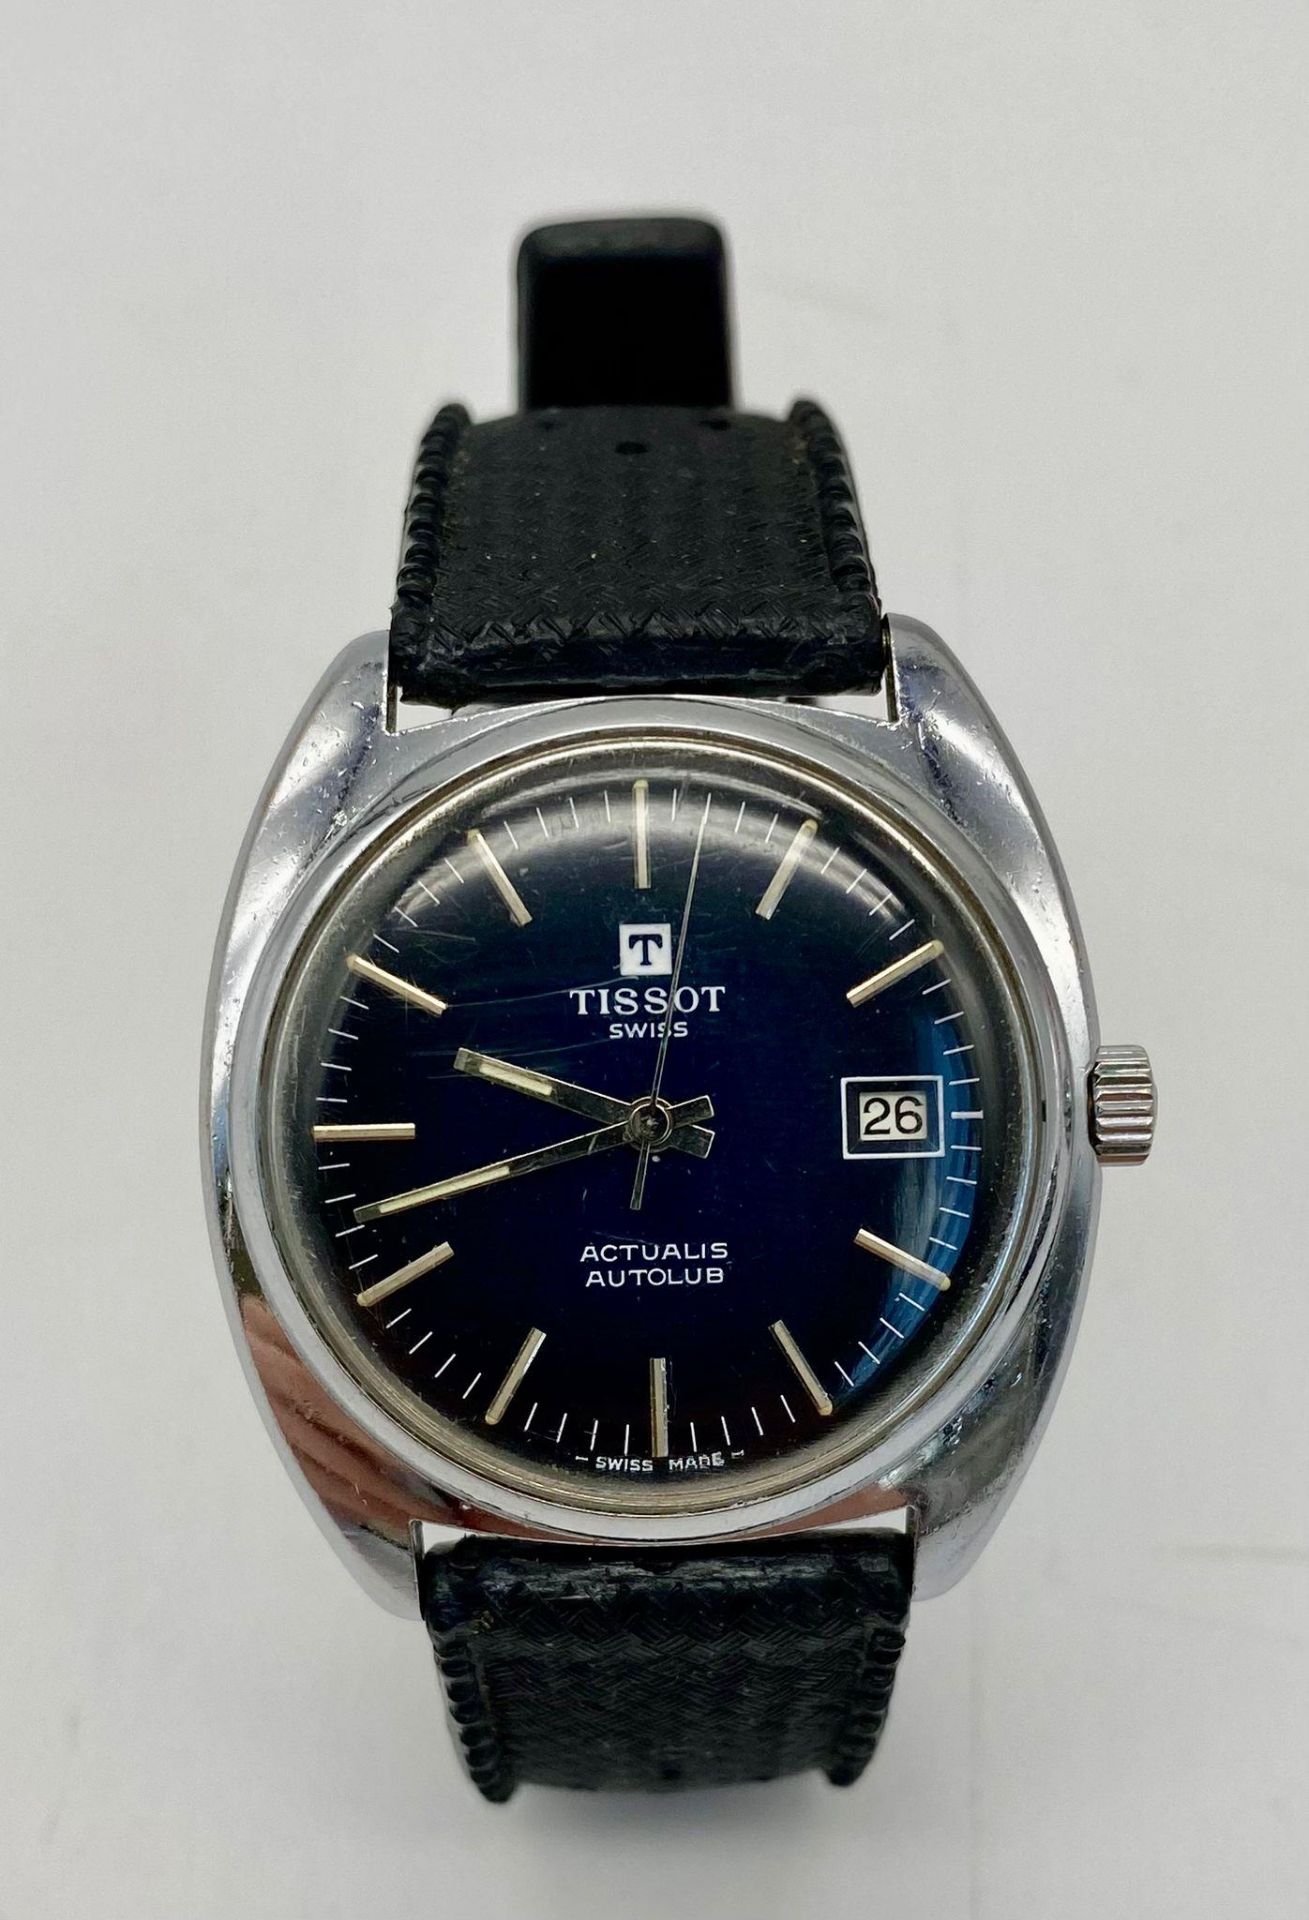 A Vintage Tissot Actualis Autolub Mechanical Gents Watch. Textured synthetic strap. Stainless